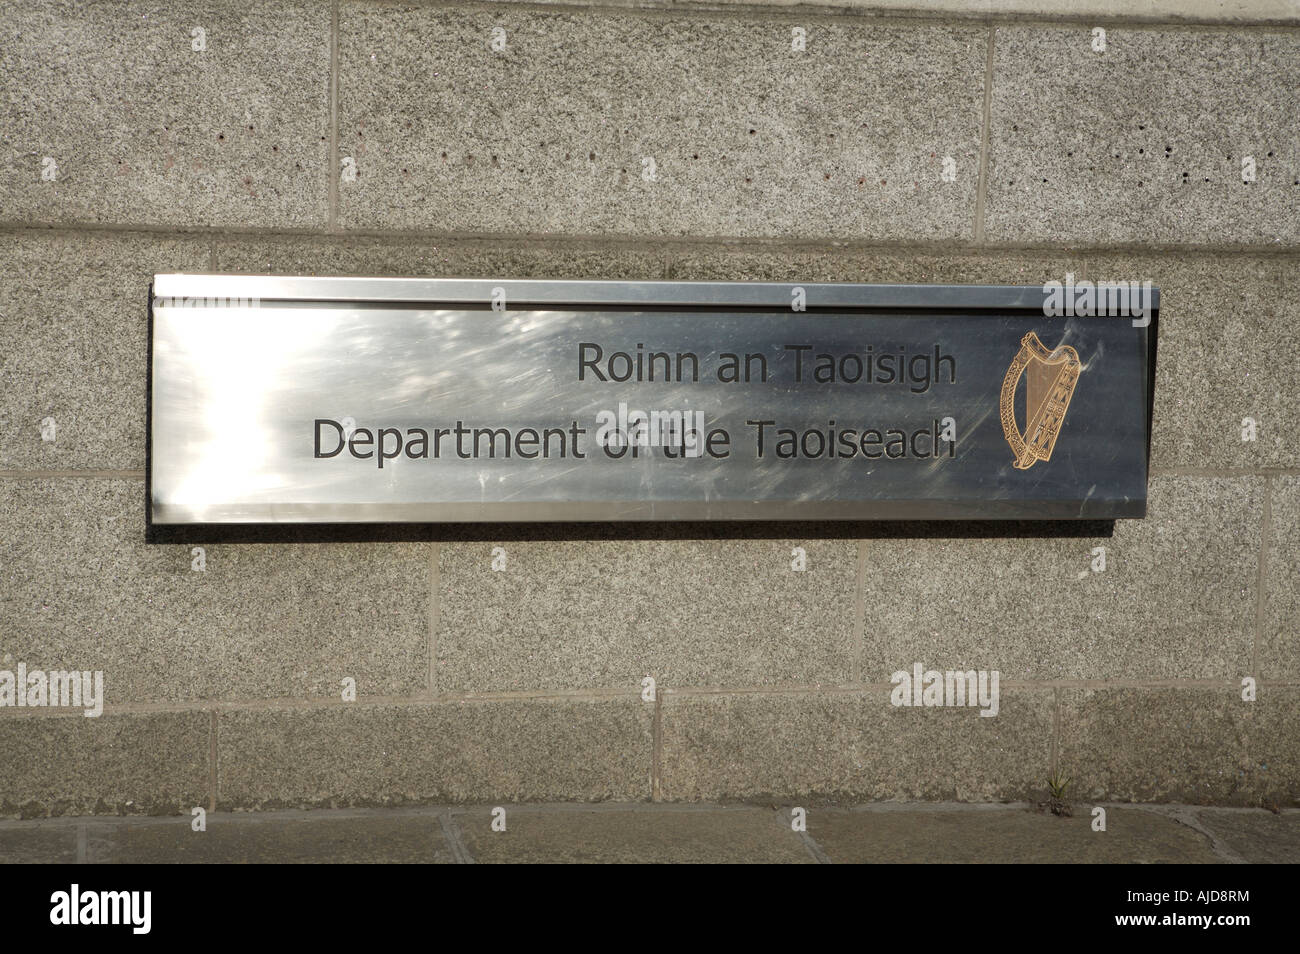 The sign outside the Department of the Taoiseach in Merrion Square Stock Photo